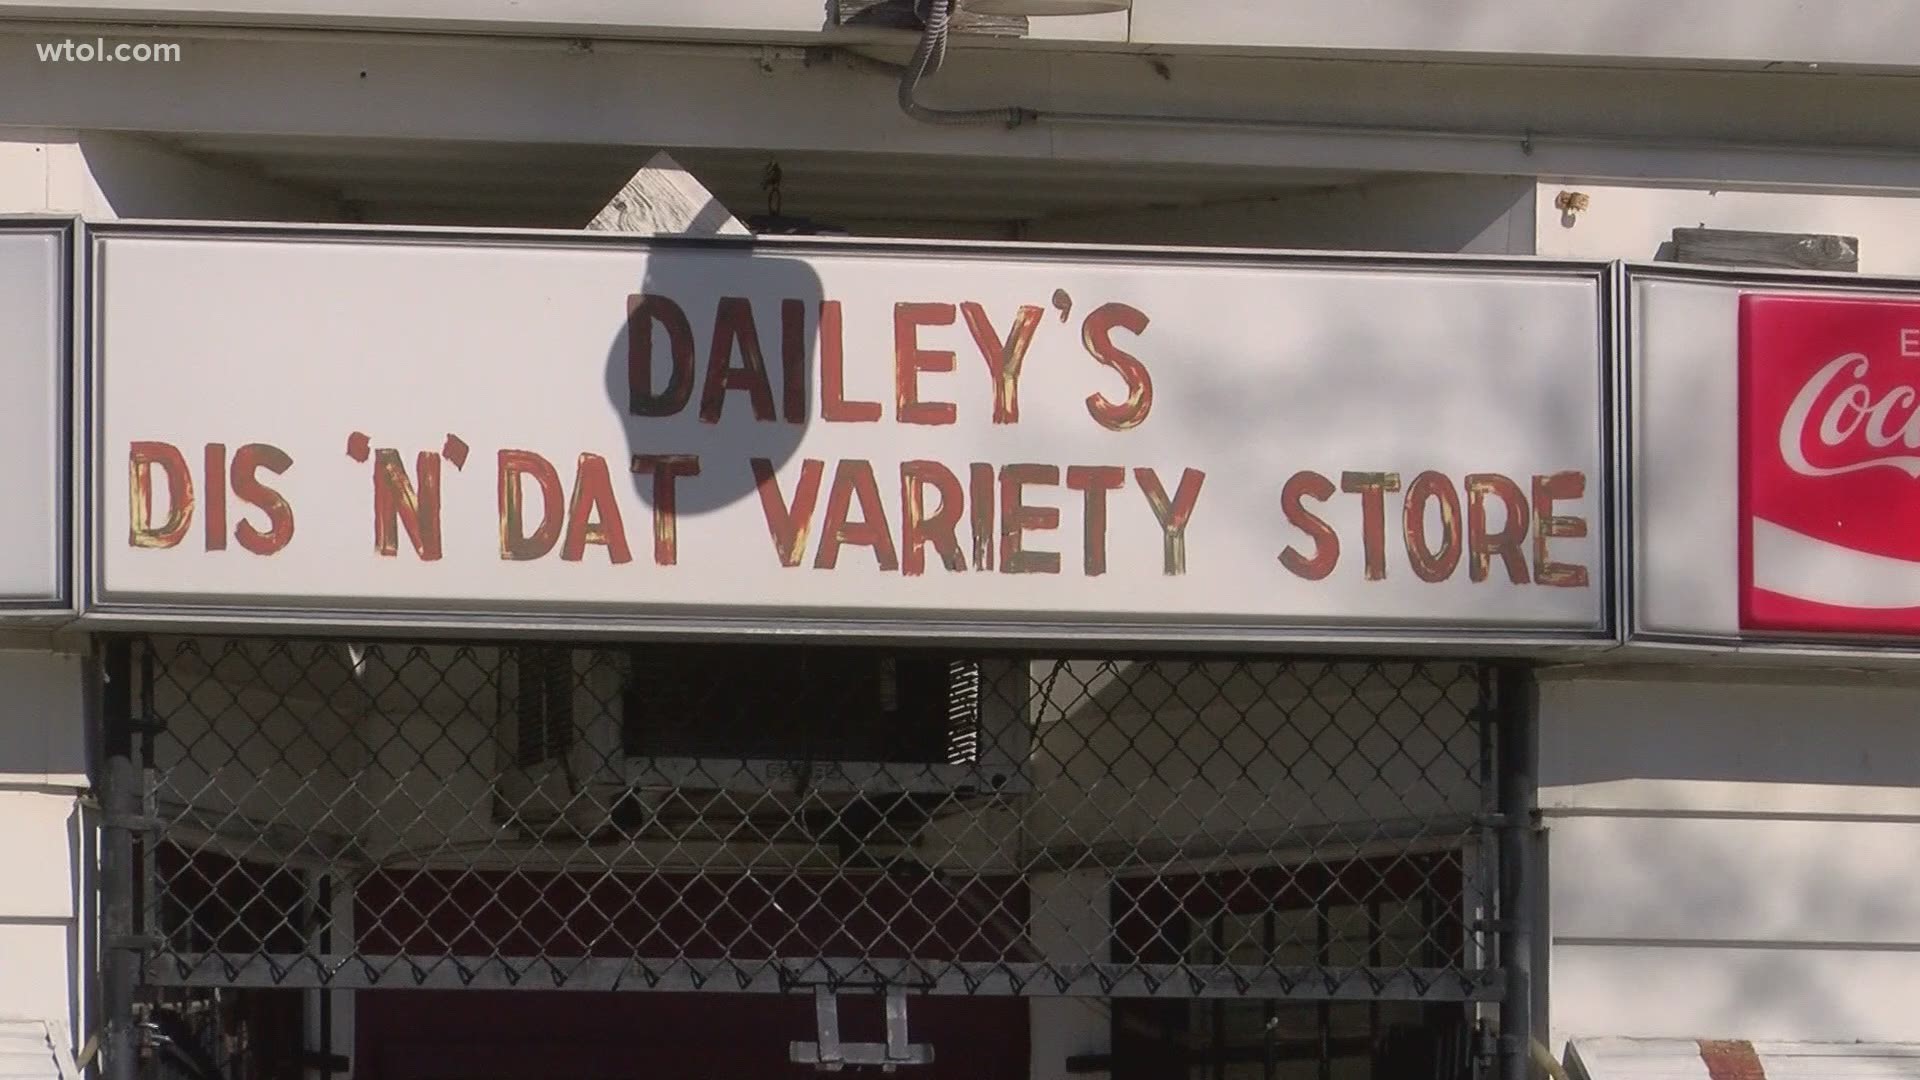 Alfred Dailey has owned and operated the Dis 'N' Dat variety store since the 70s. His neighbors say he has been a positive leader in the community.